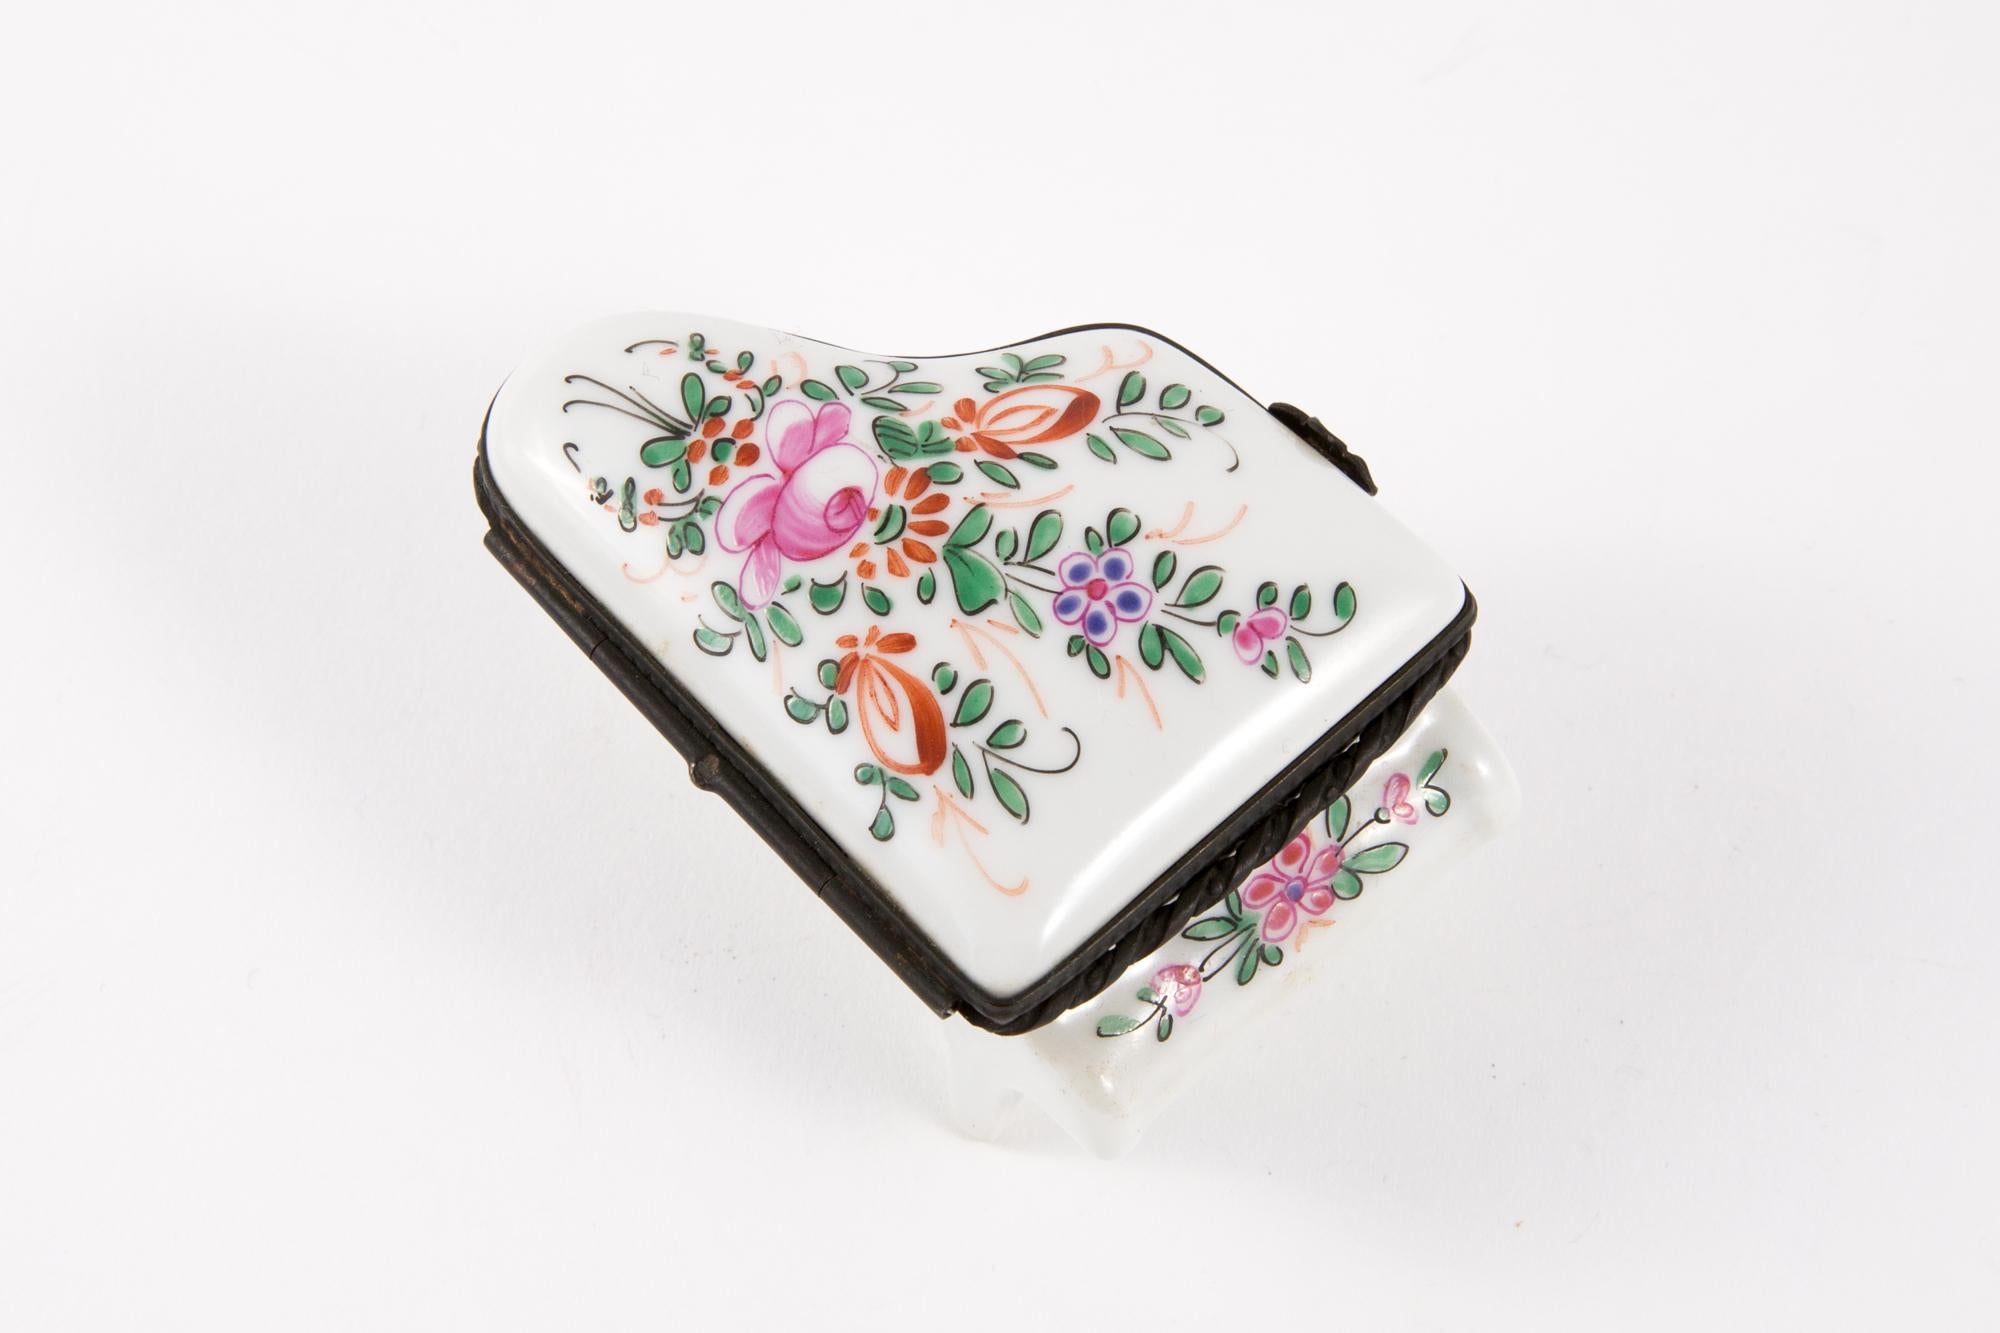 Porcelain piano shaped pill box featuring a flowers stage decor, a metallic black tone hook to keep it open.
In good vintage condition. Made in France. 
Height Closed 1.7in. (4,5cm)
Maxi Width 2in. (5.5cm)
Maxi Length 2.7in (7cm)
We guarantee you